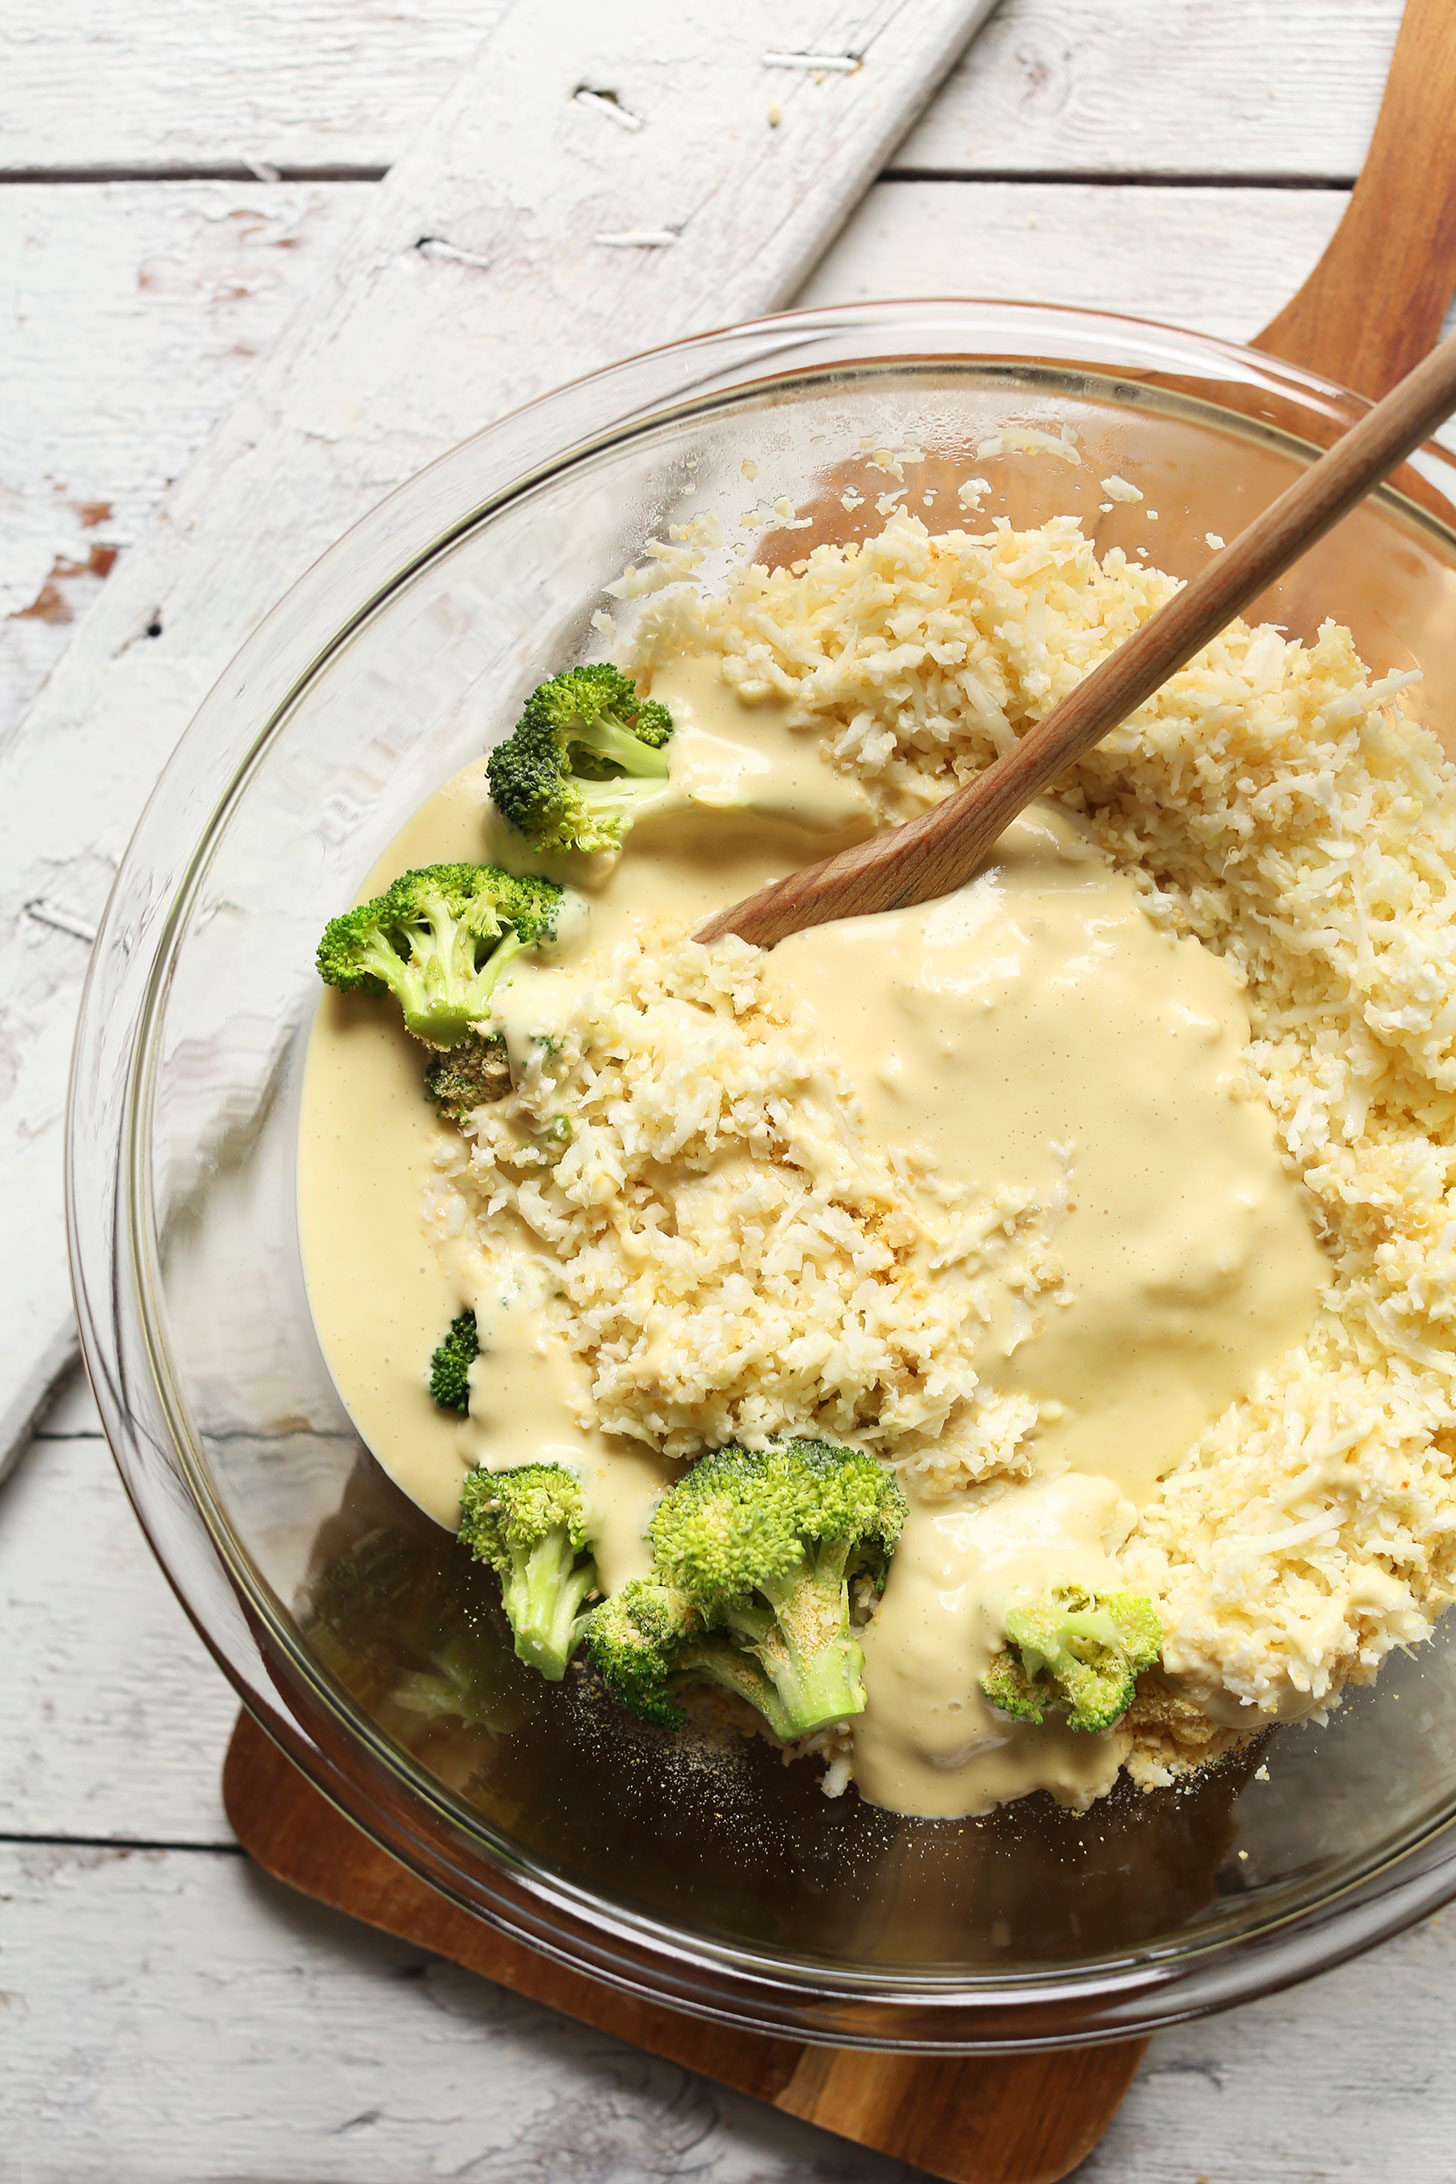 Stirring together ingredients for our gluten-free plant-based Cheesy Cauliflower Rice Broccoli Bake